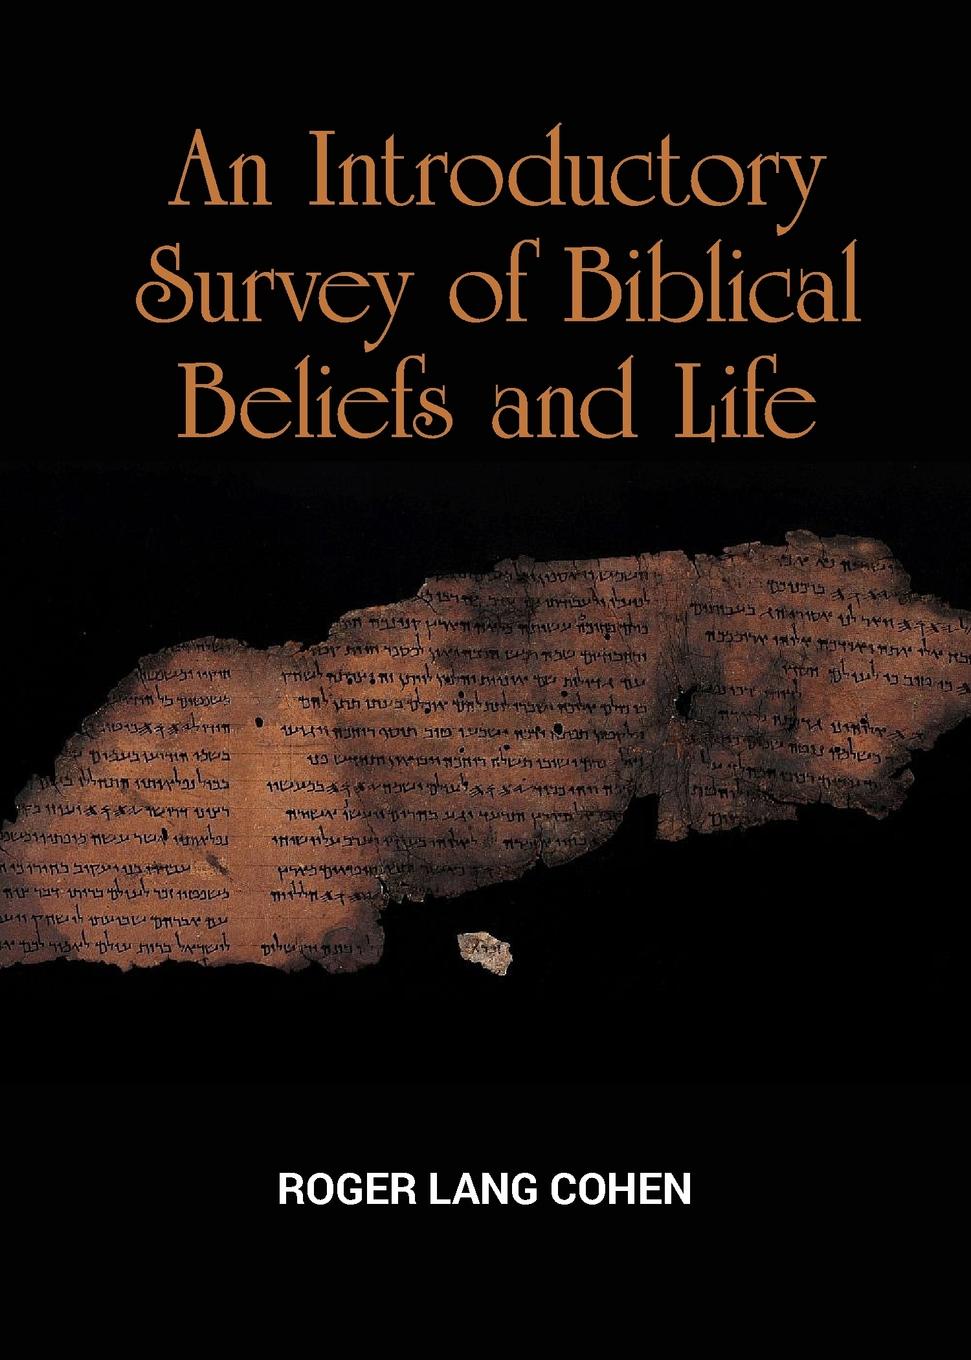 An Introductory Survey of Biblical Beliefs and Life